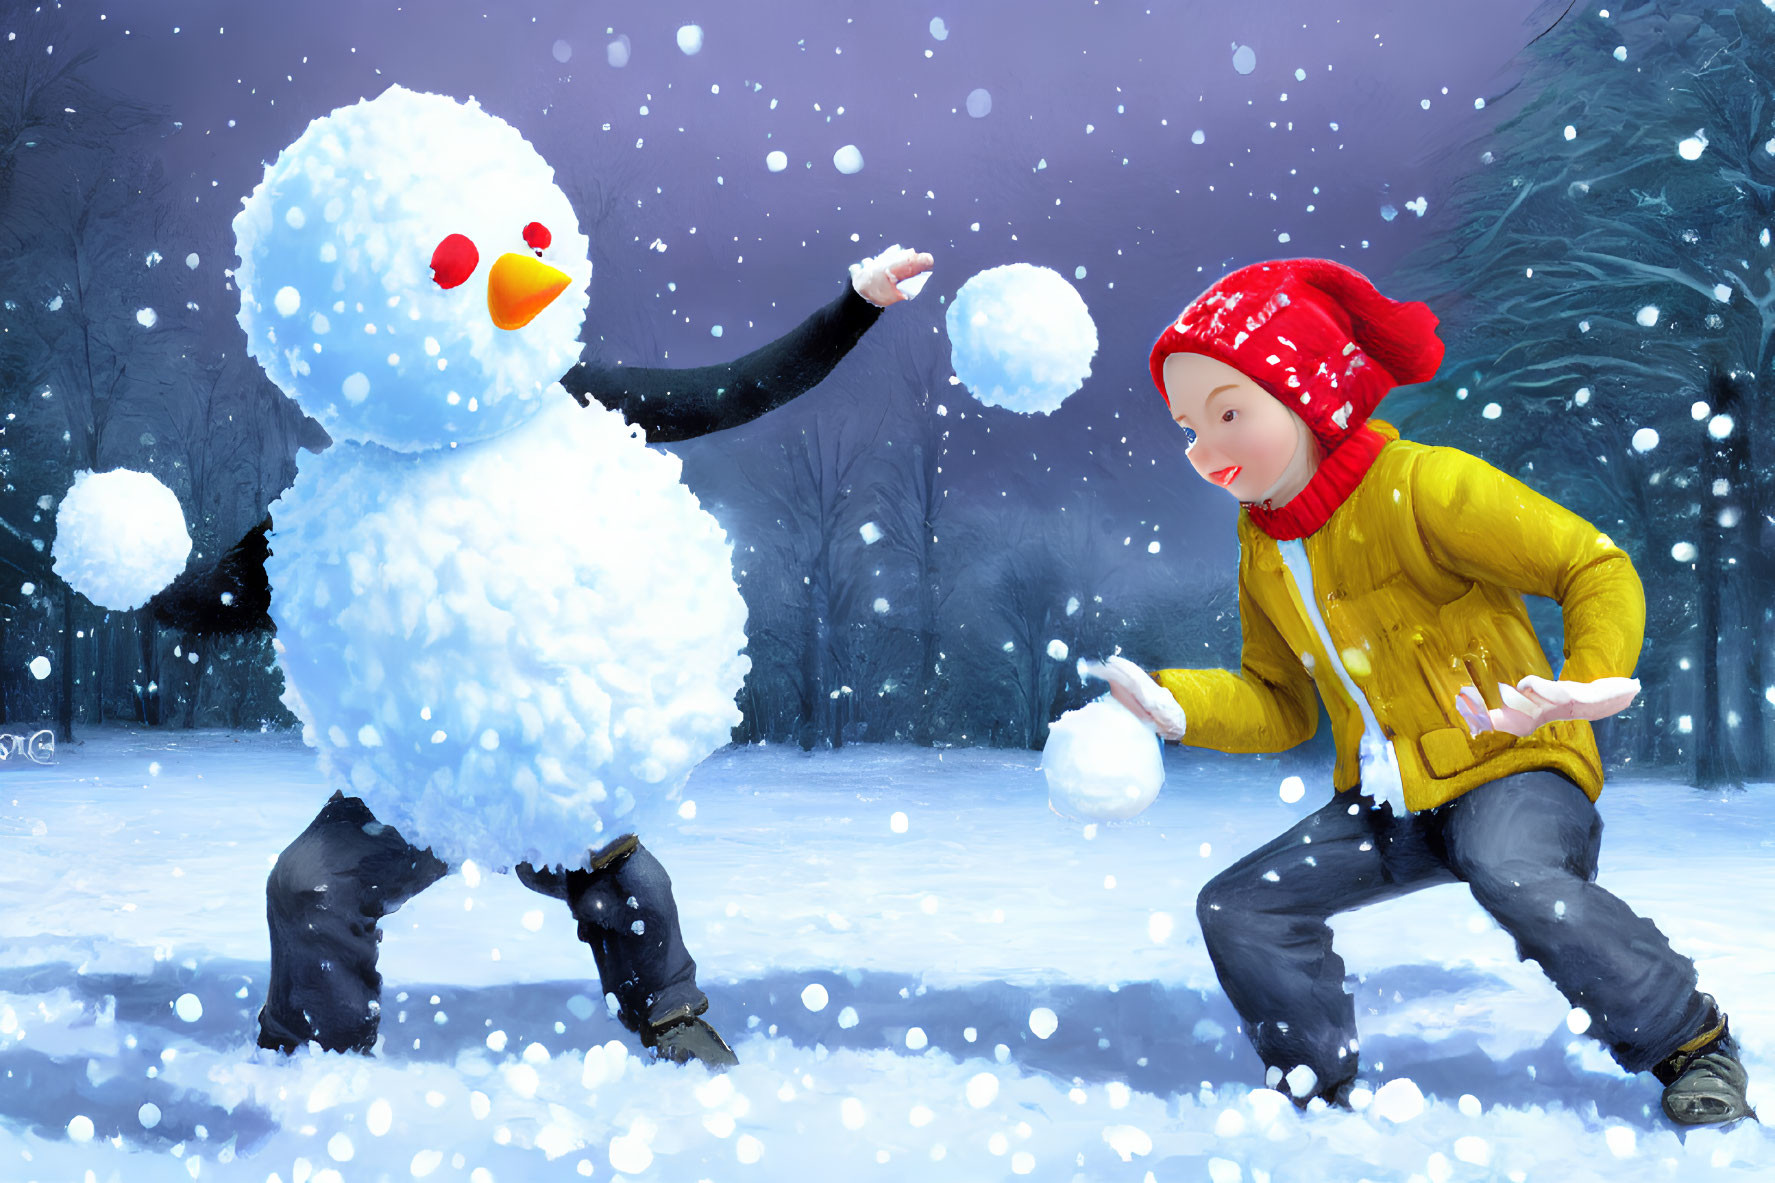 Child playing with snowball near smiling snowman in snowy landscape